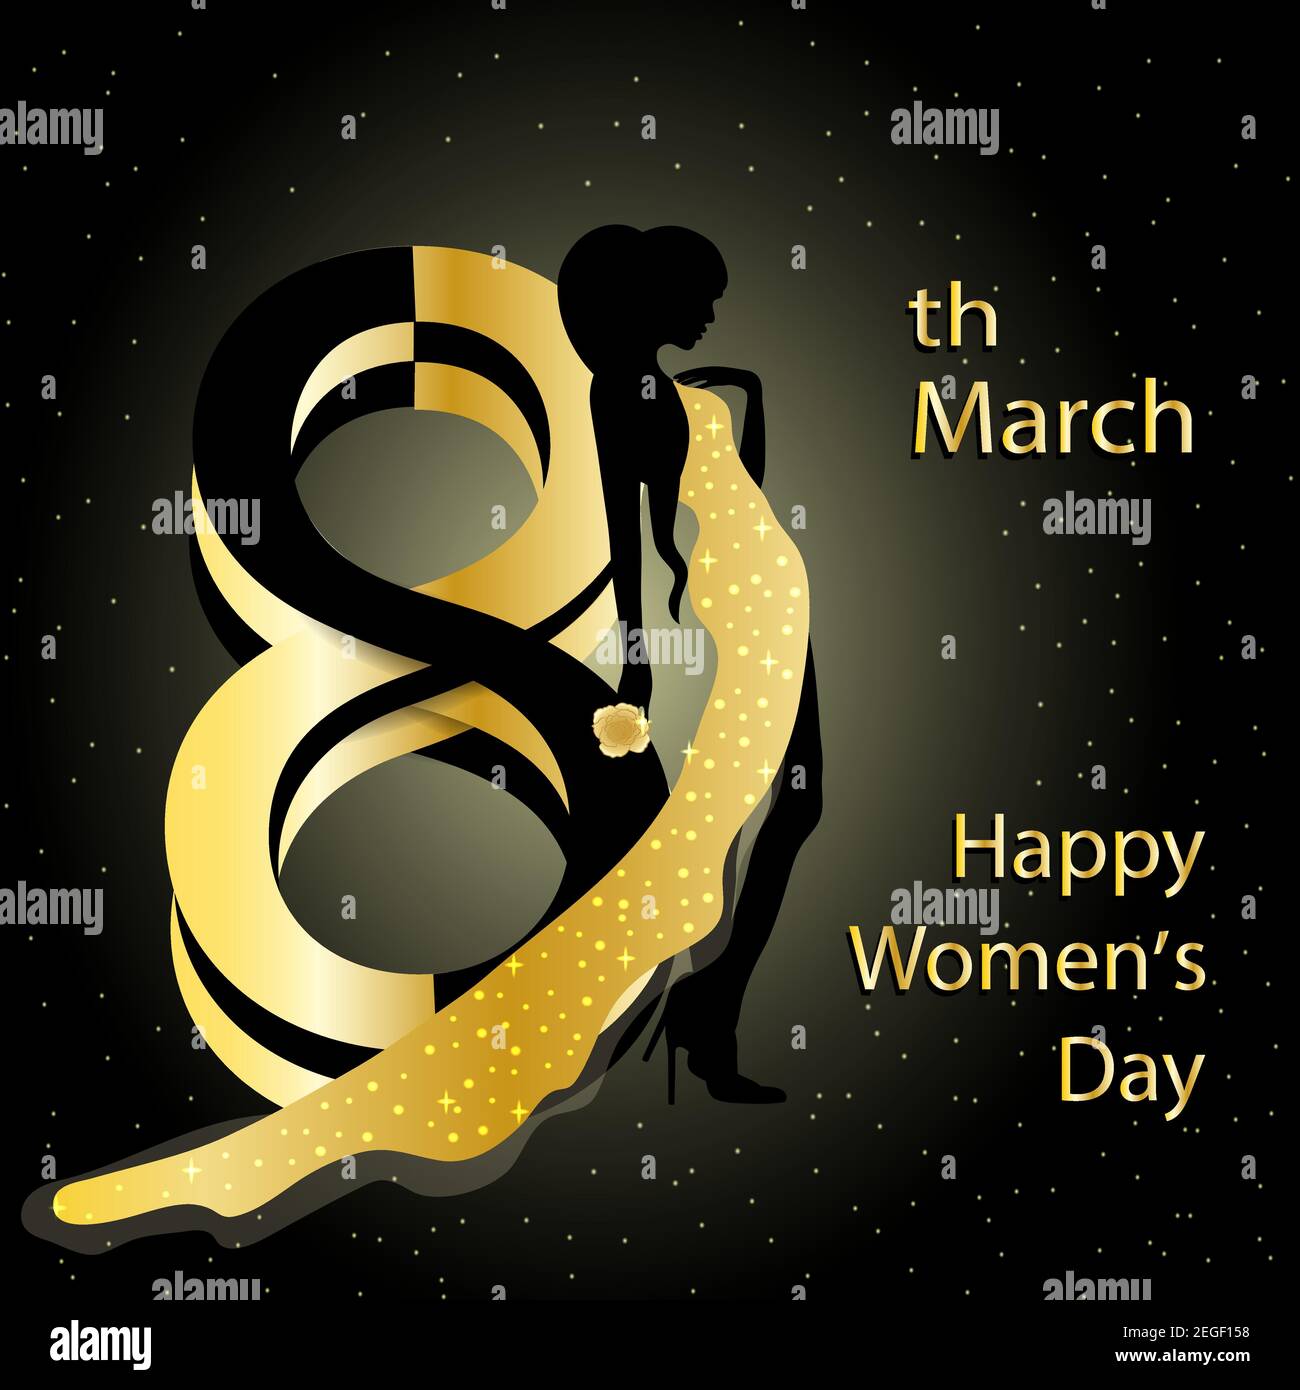 Womens day greeting card with girl in gold dress Stock Vector